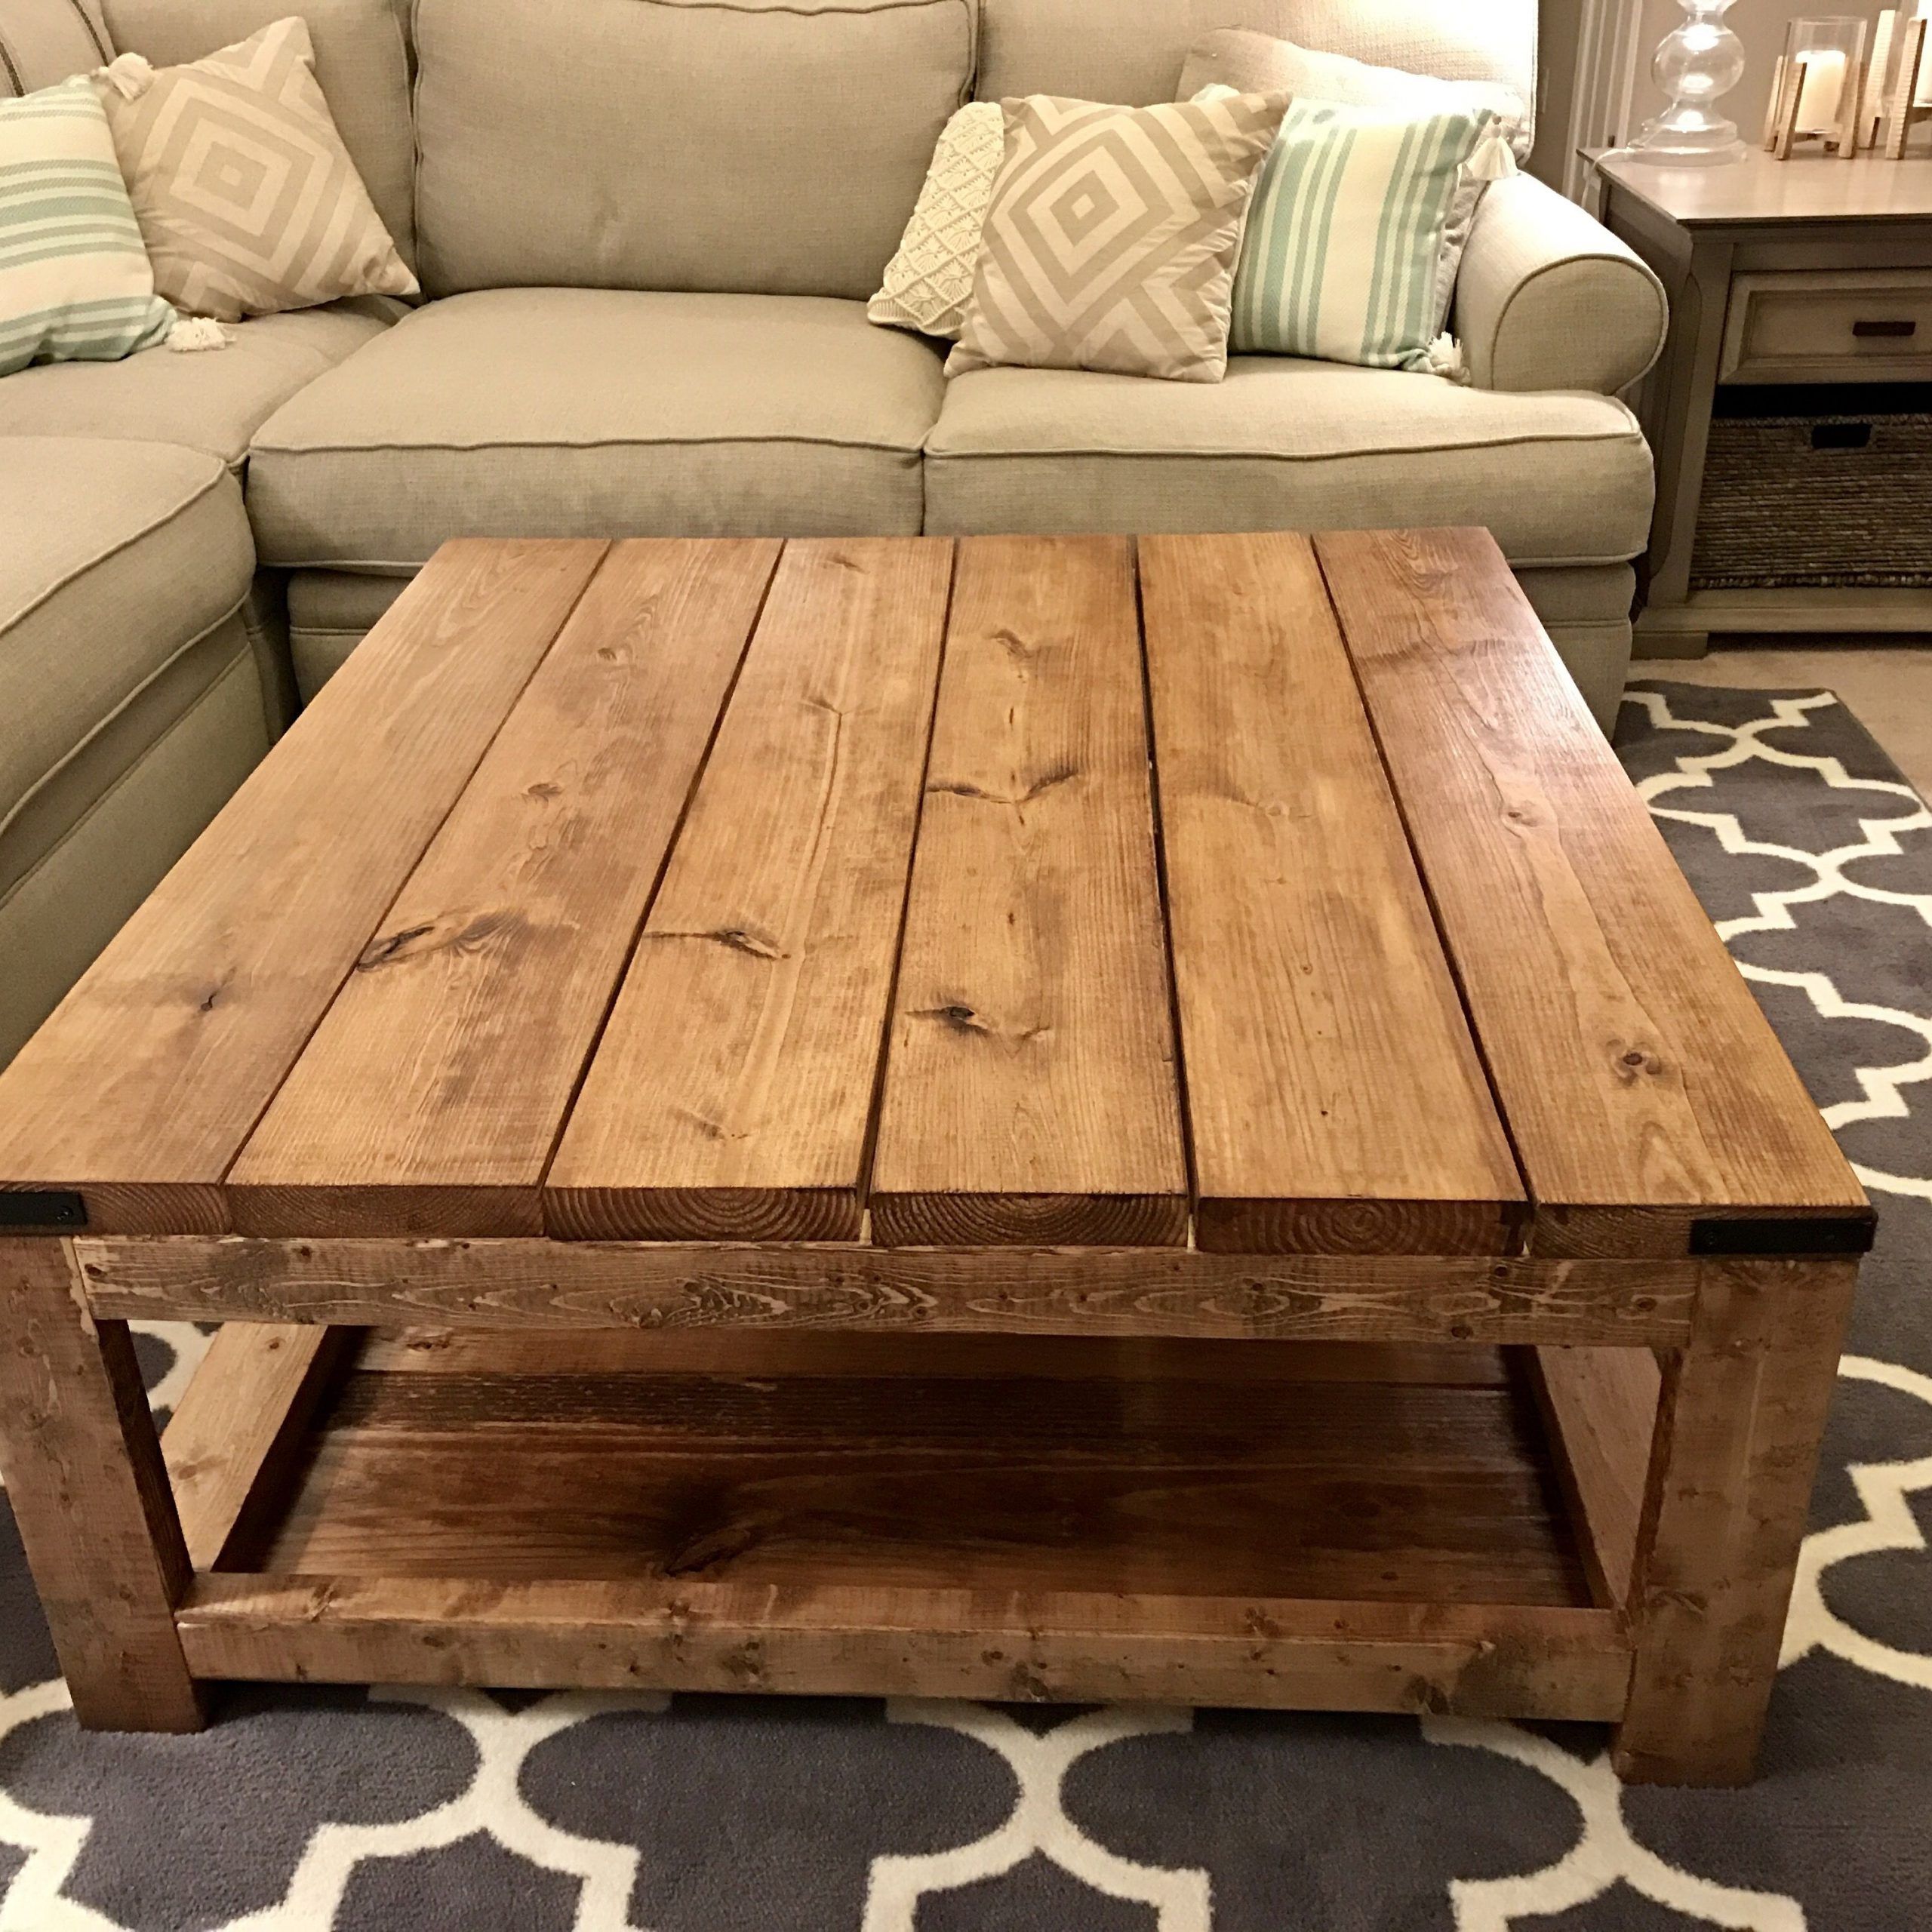 Fashionable Diy Square Coffee Table (View 2 of 10)